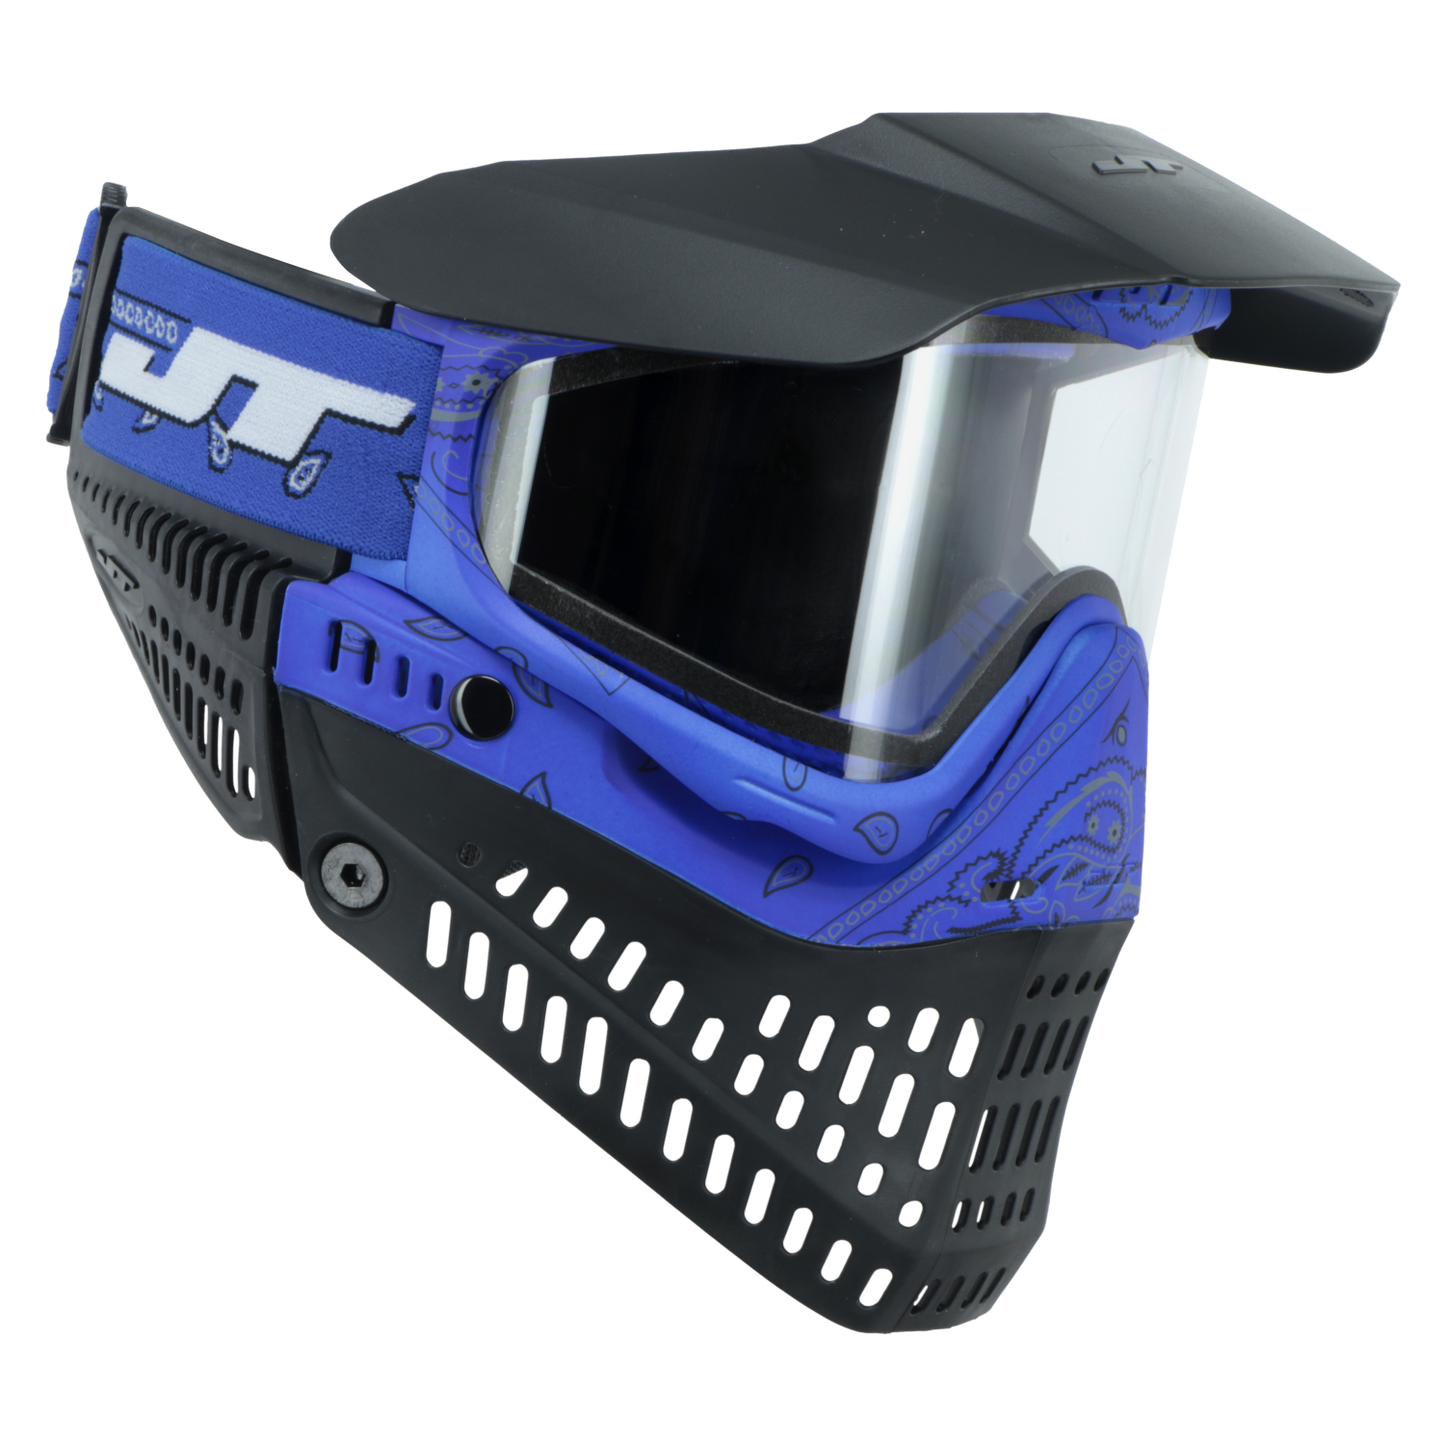 JT Paintball Spectra Proflex Goggle - Bandana Blue Limited Edition - with lens [Thermal Clear & Thermal Smoke]